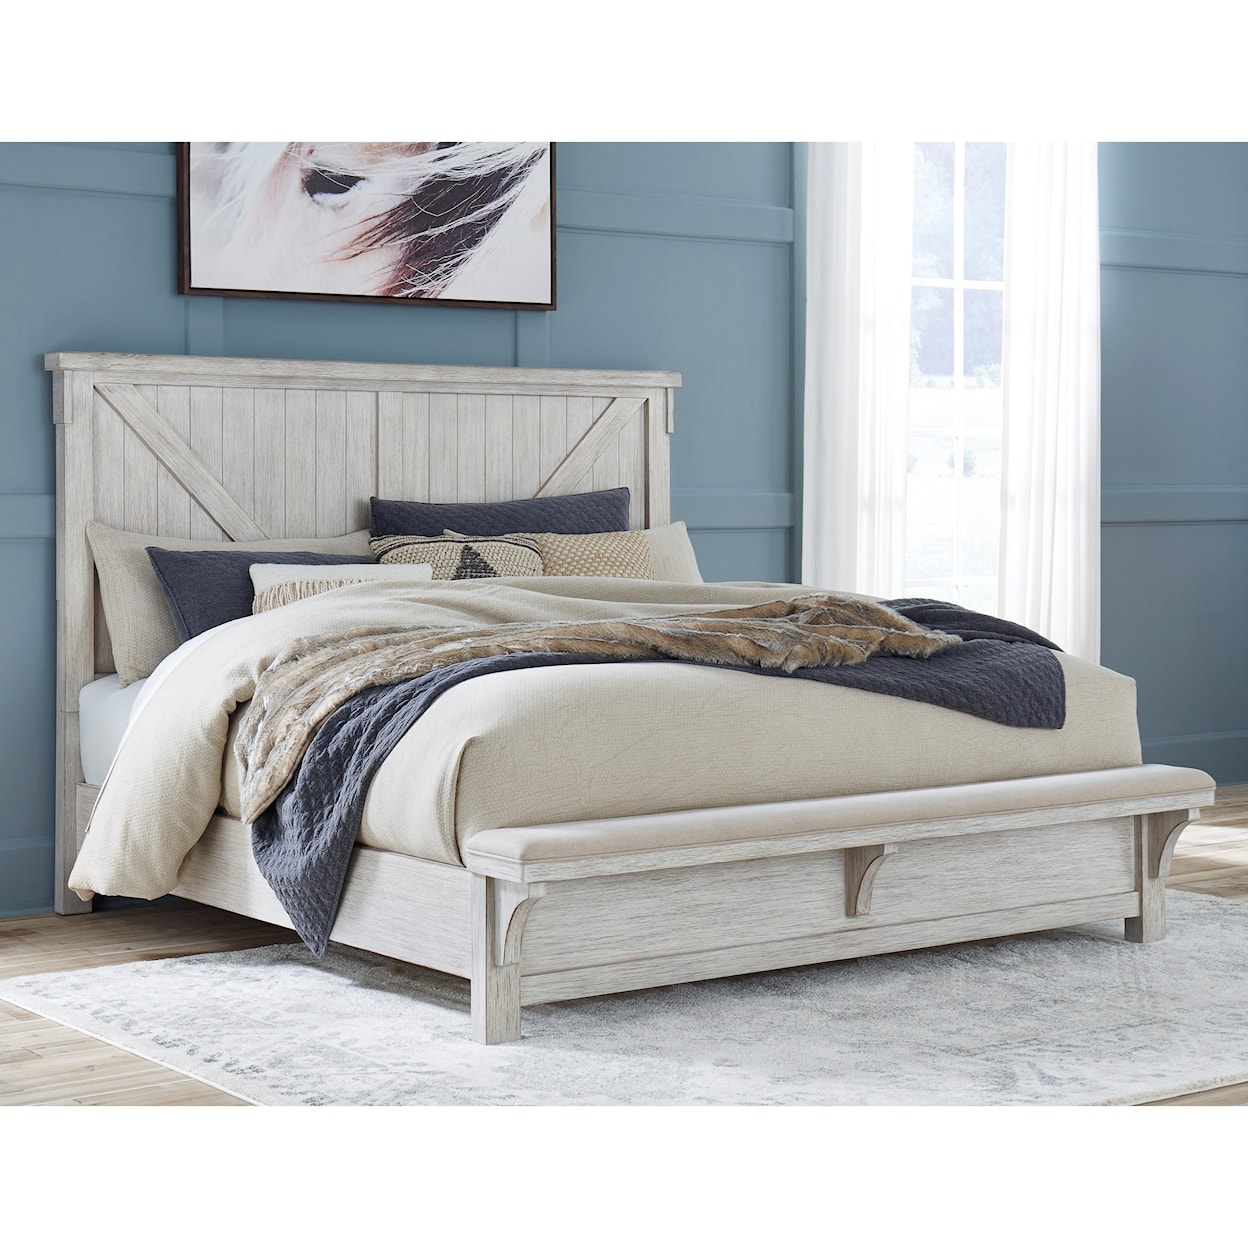 Benchcraft Brashland Queen Bed with Footboard Bench